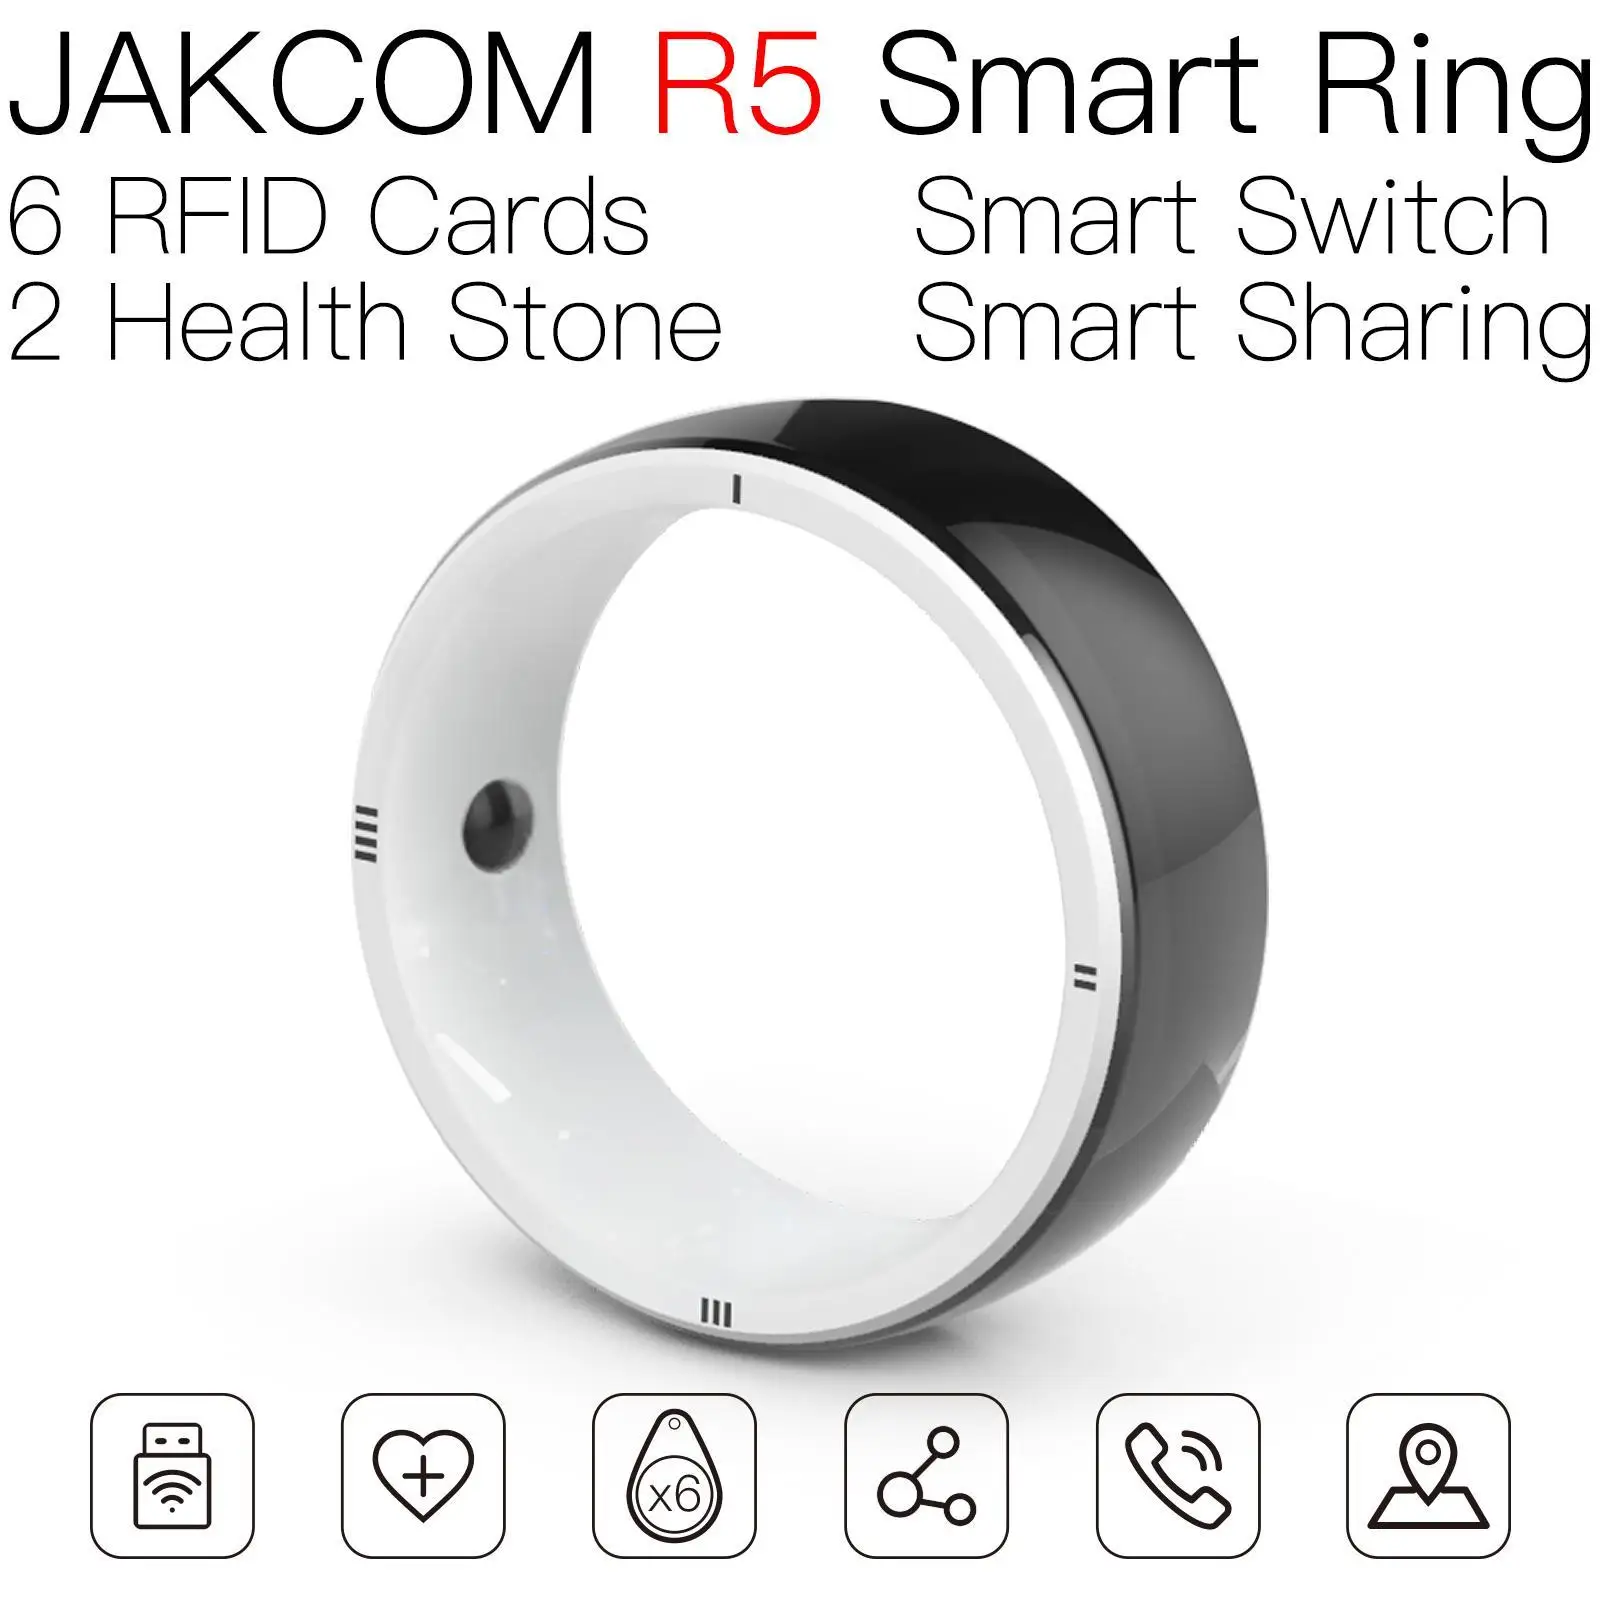 

JAKCOM R5 Smart Ring Match to tags radio card nfc metal sticker uid changeable business rfid microchip reader chip 24n50c tag